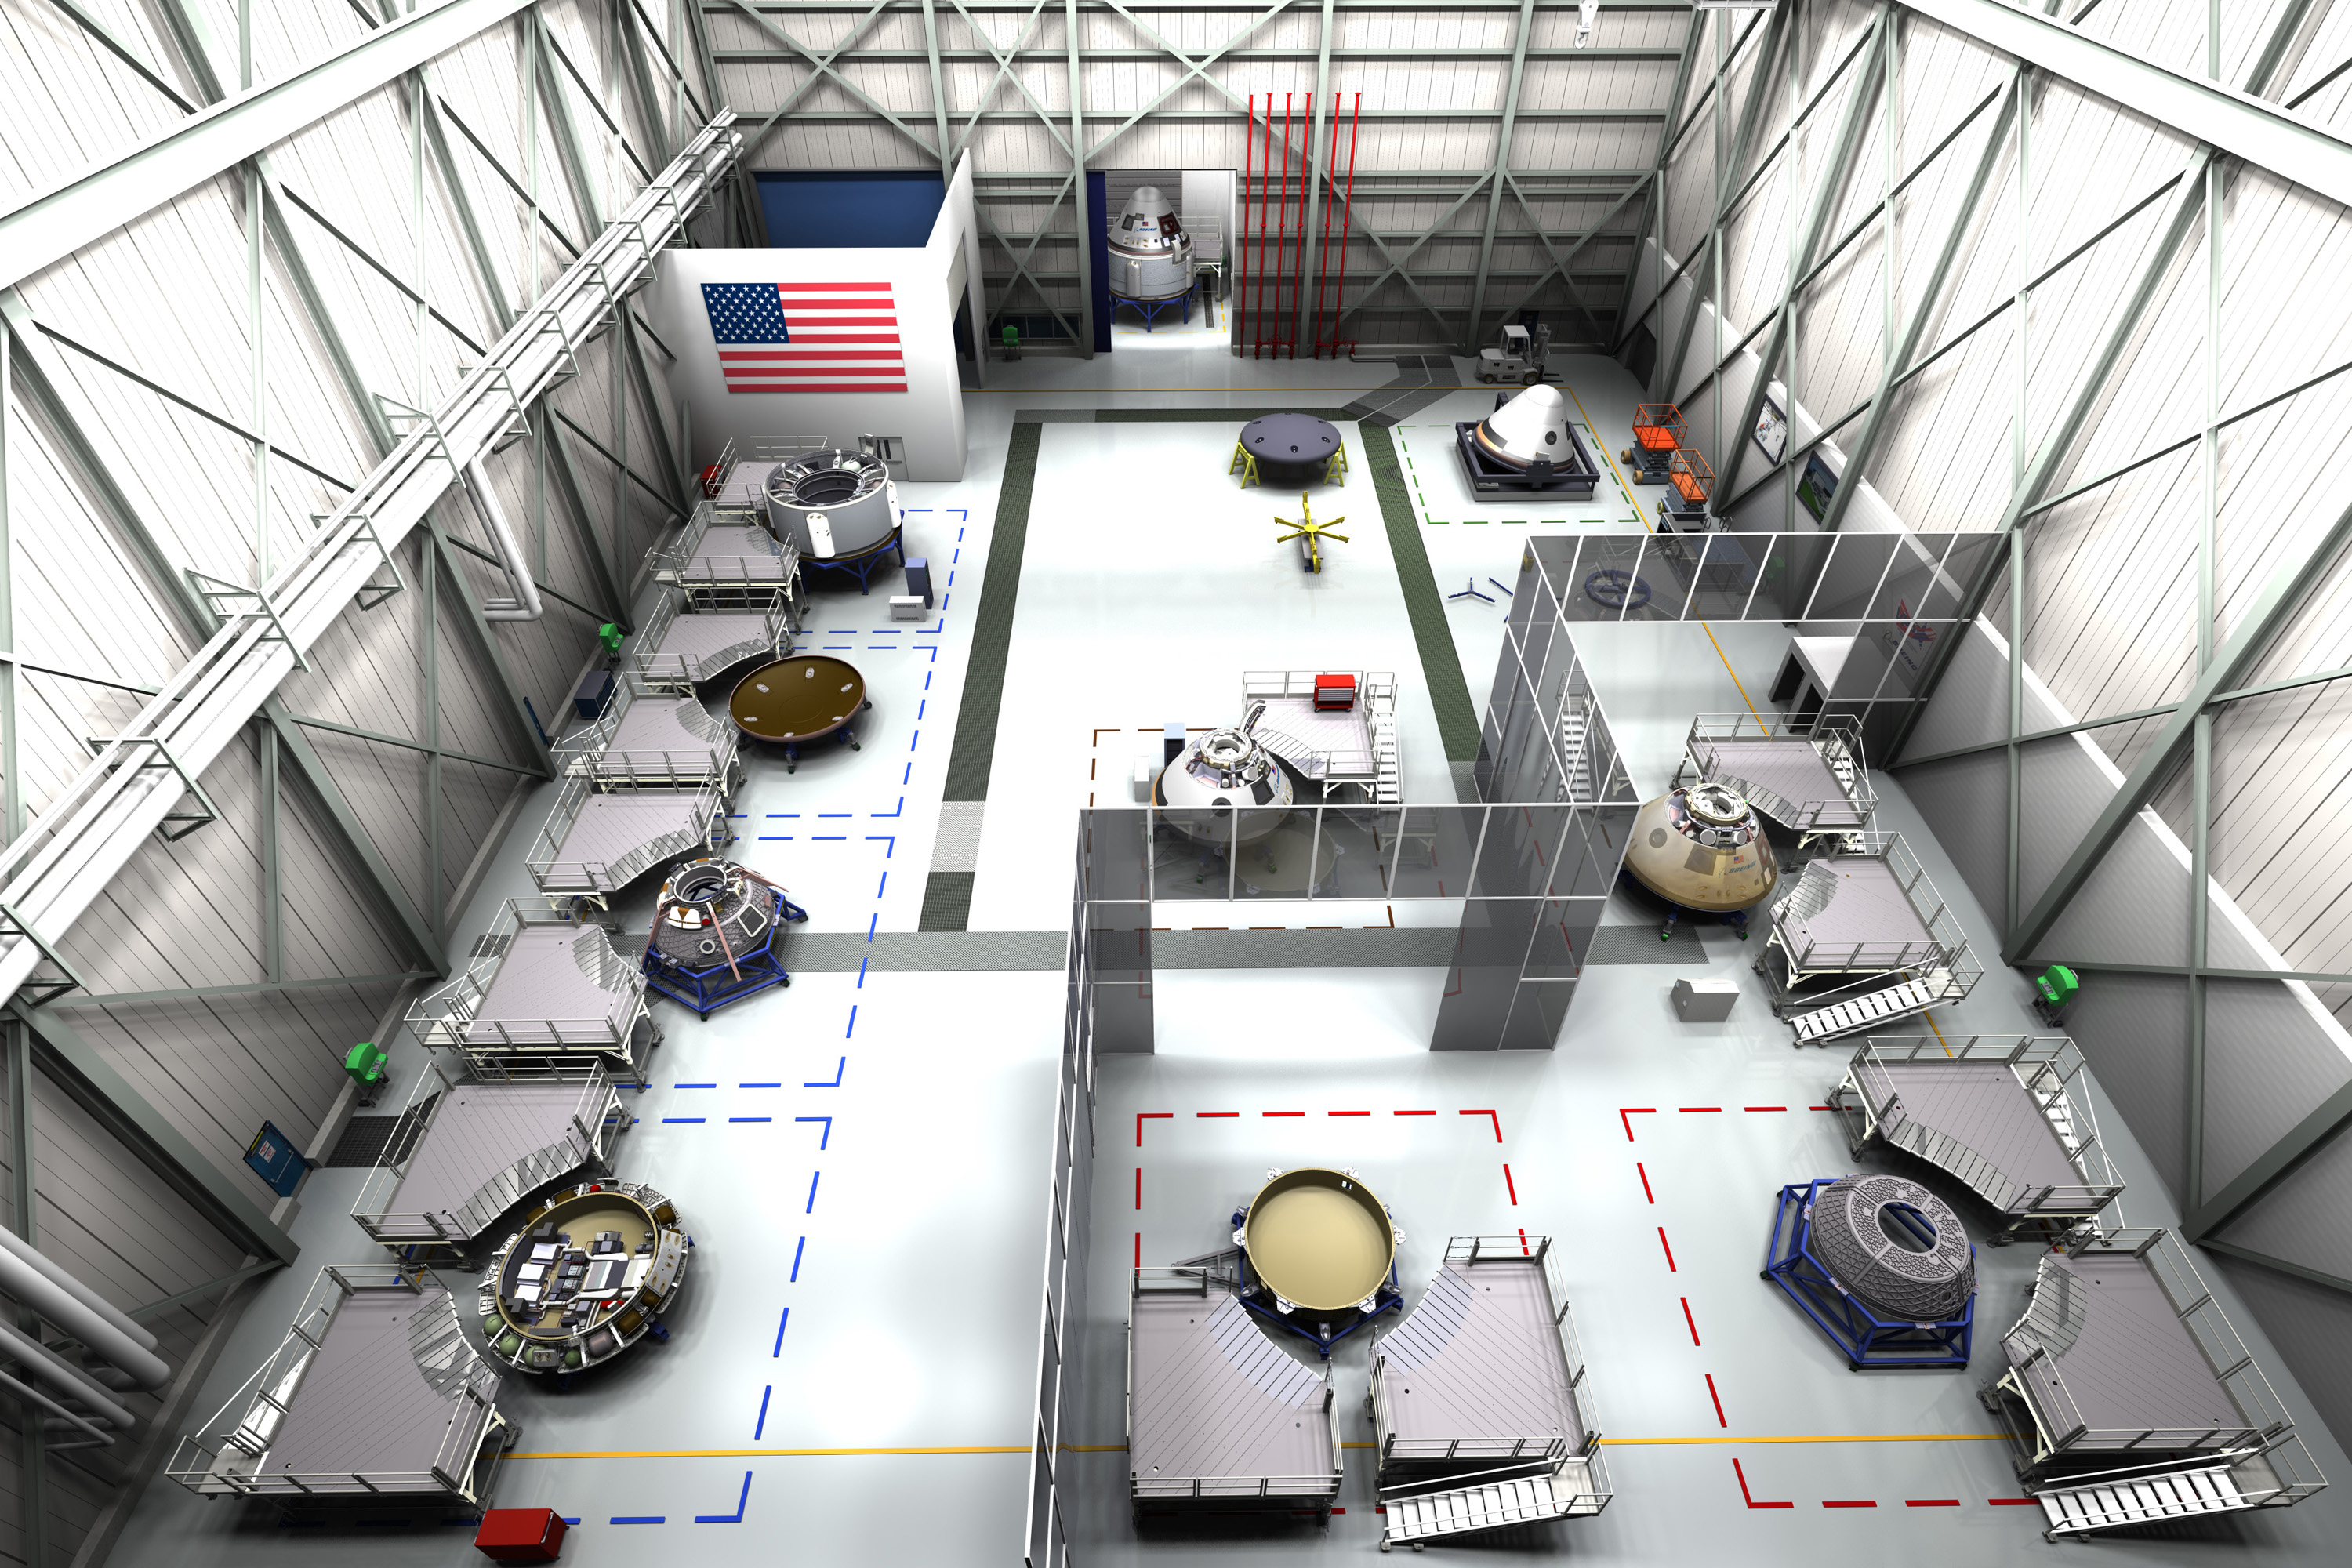 Concept of the floor of the CST-100 assembly facility that Boeing envisions at Kennedy Space Center.  Credit:  Boeing